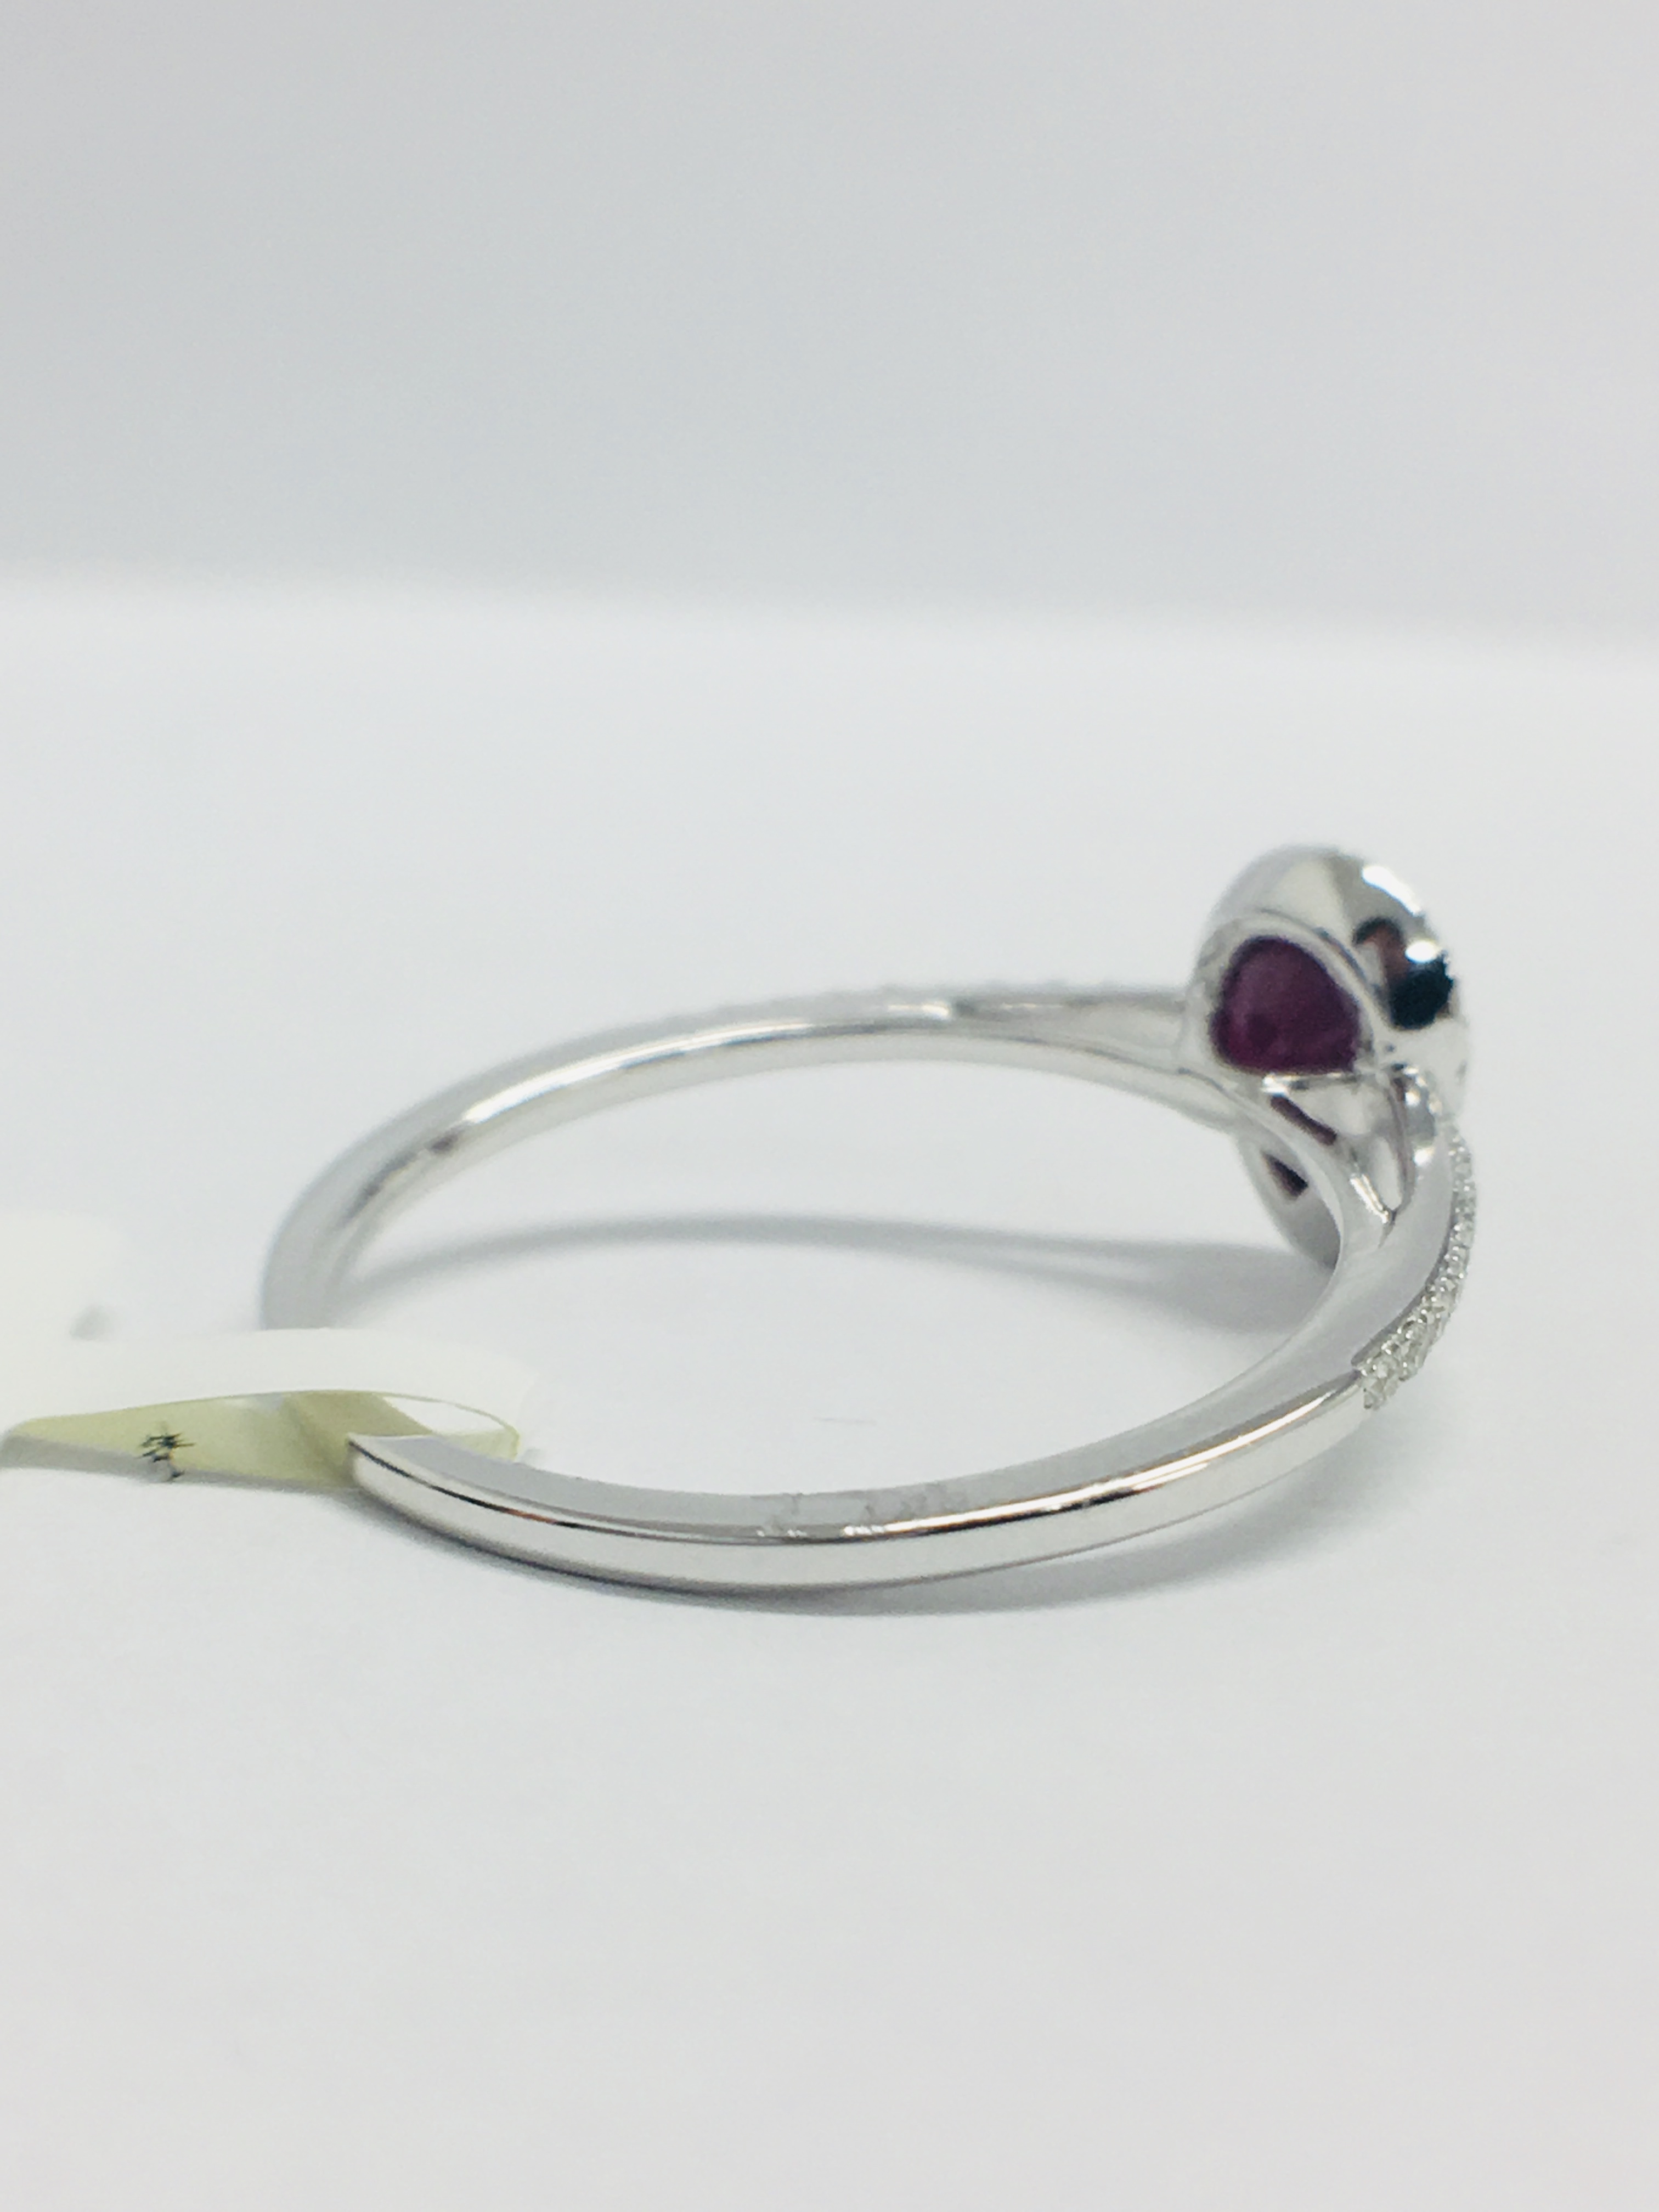 9Ct White Pearshape Ruby Diamond Ring, - Image 7 of 11